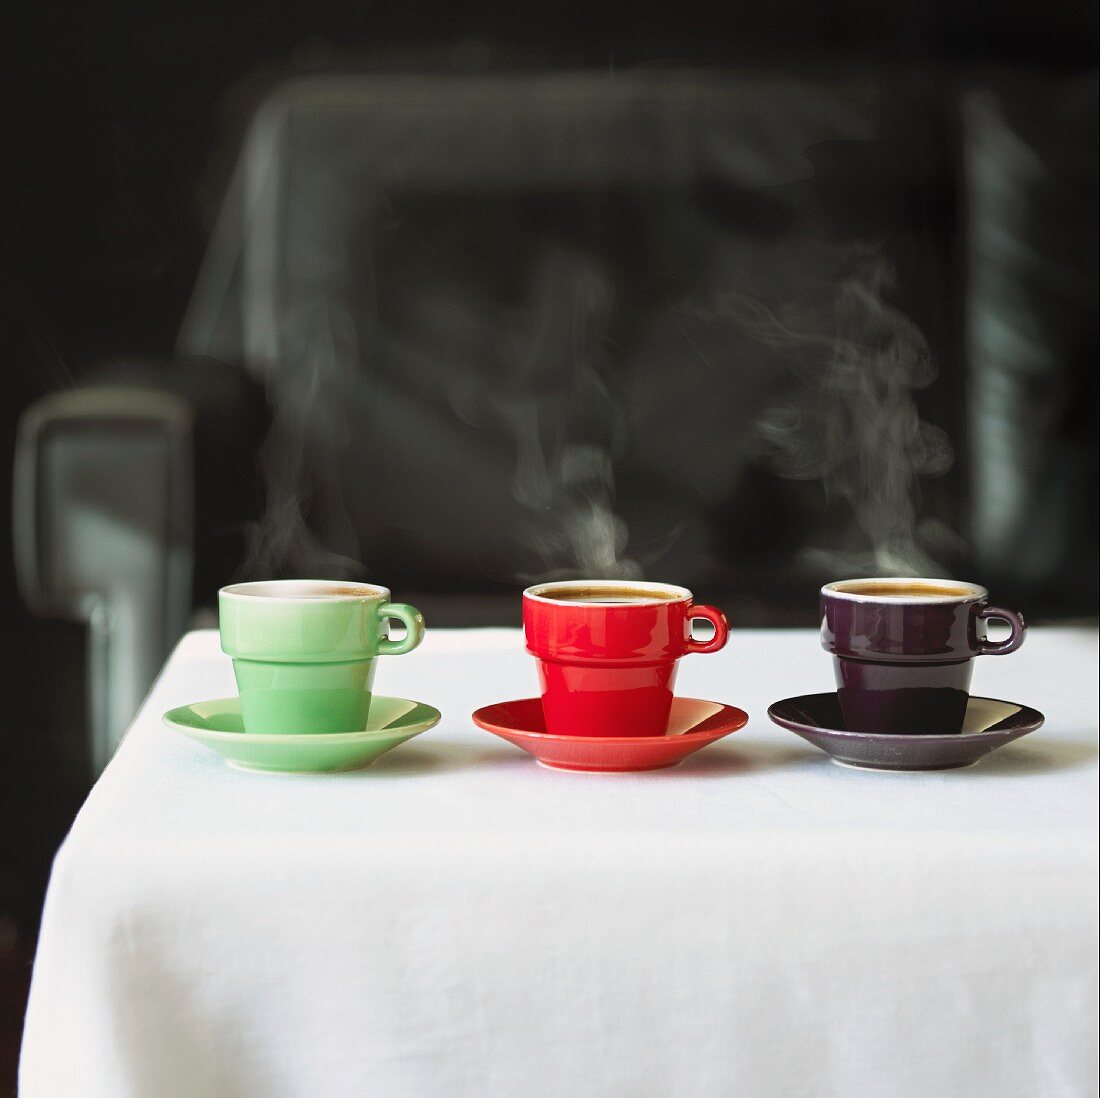 Green, red and black cups on a table